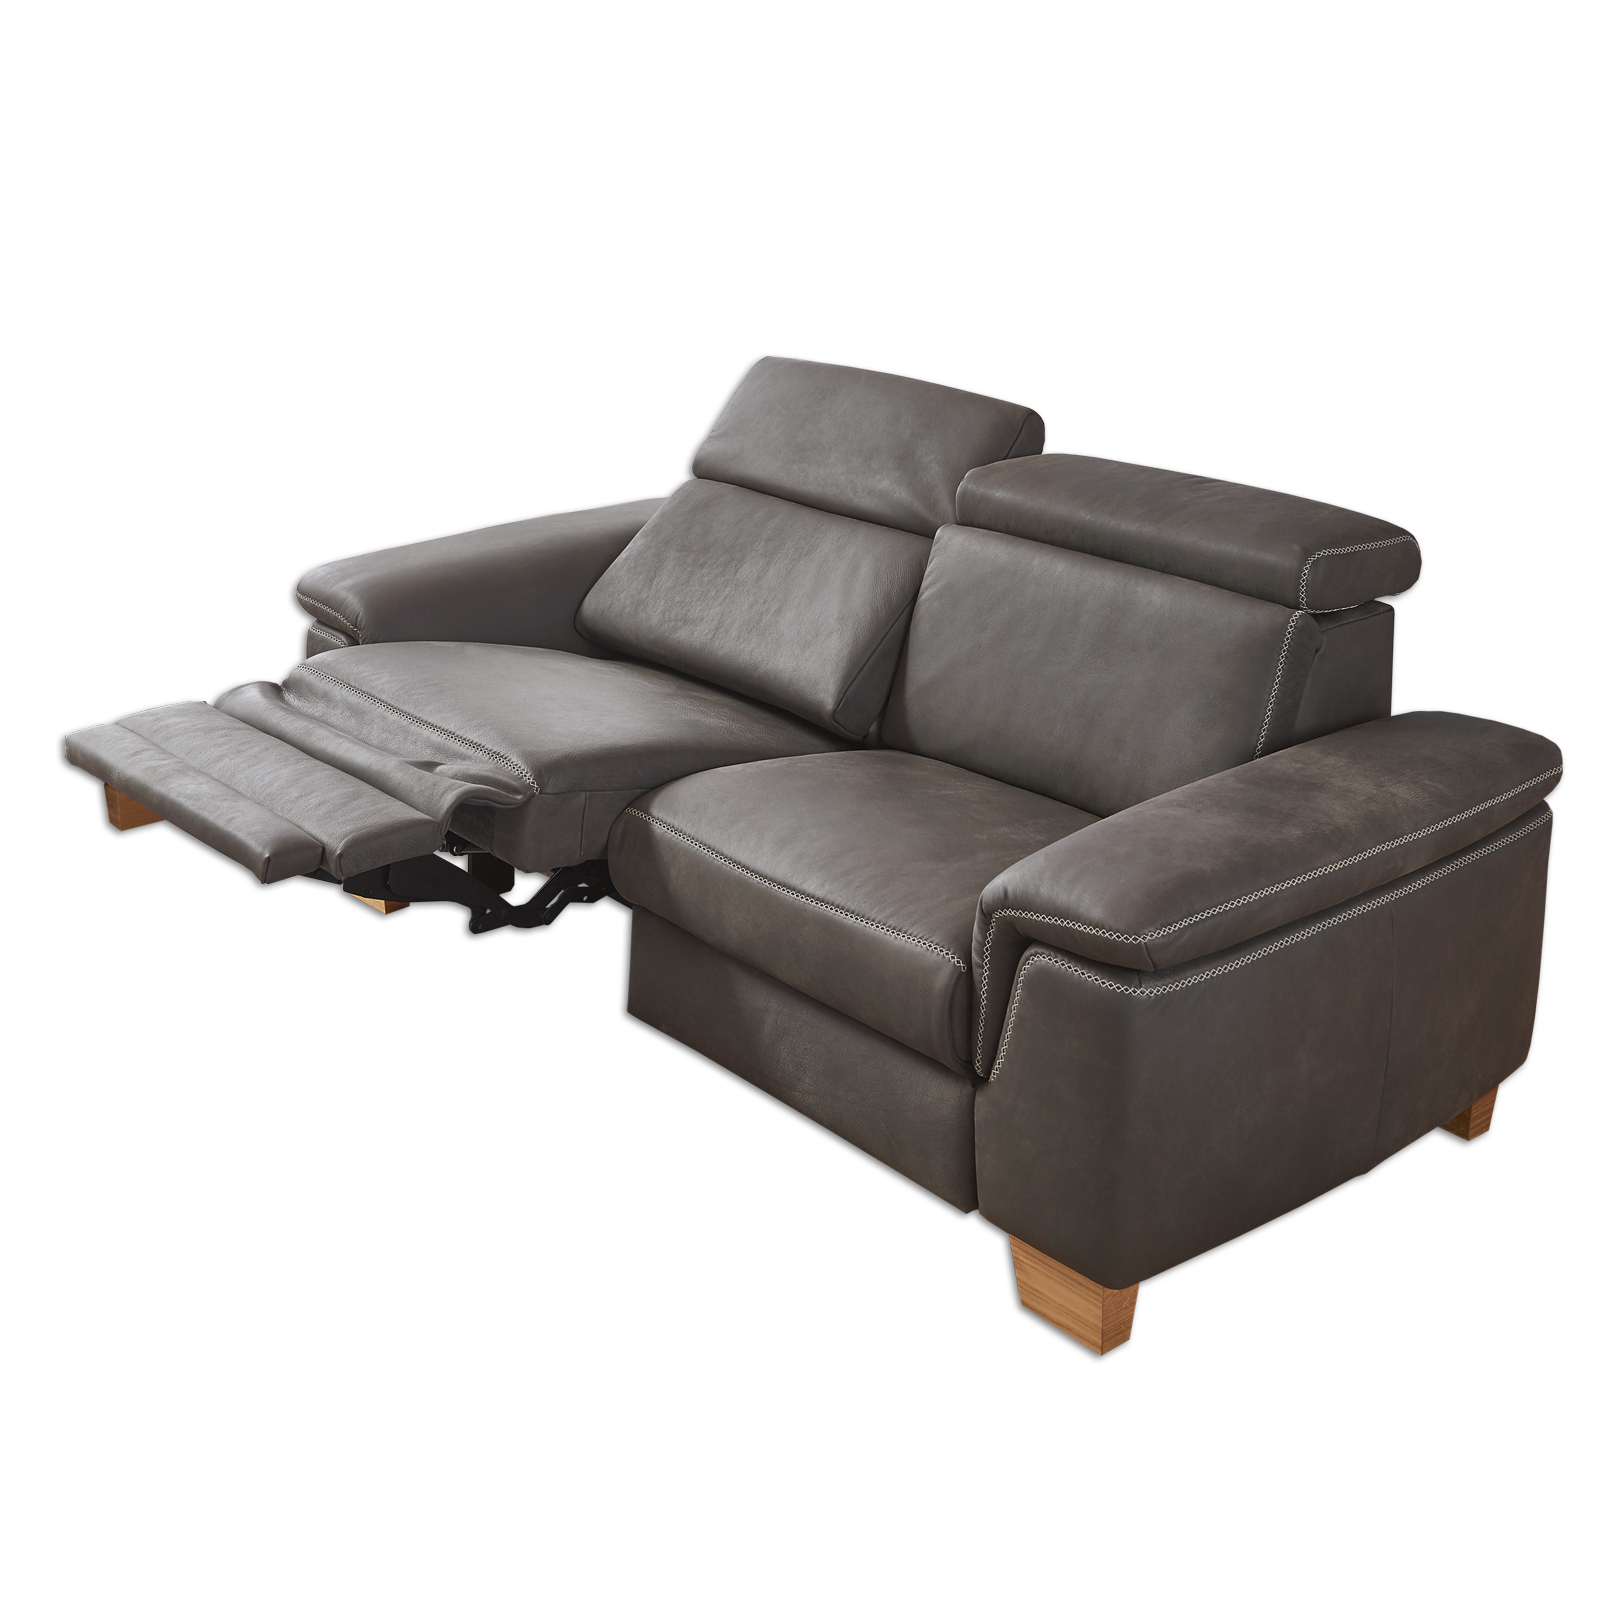 2 Sitzer Couch Mit Relaxfunktion